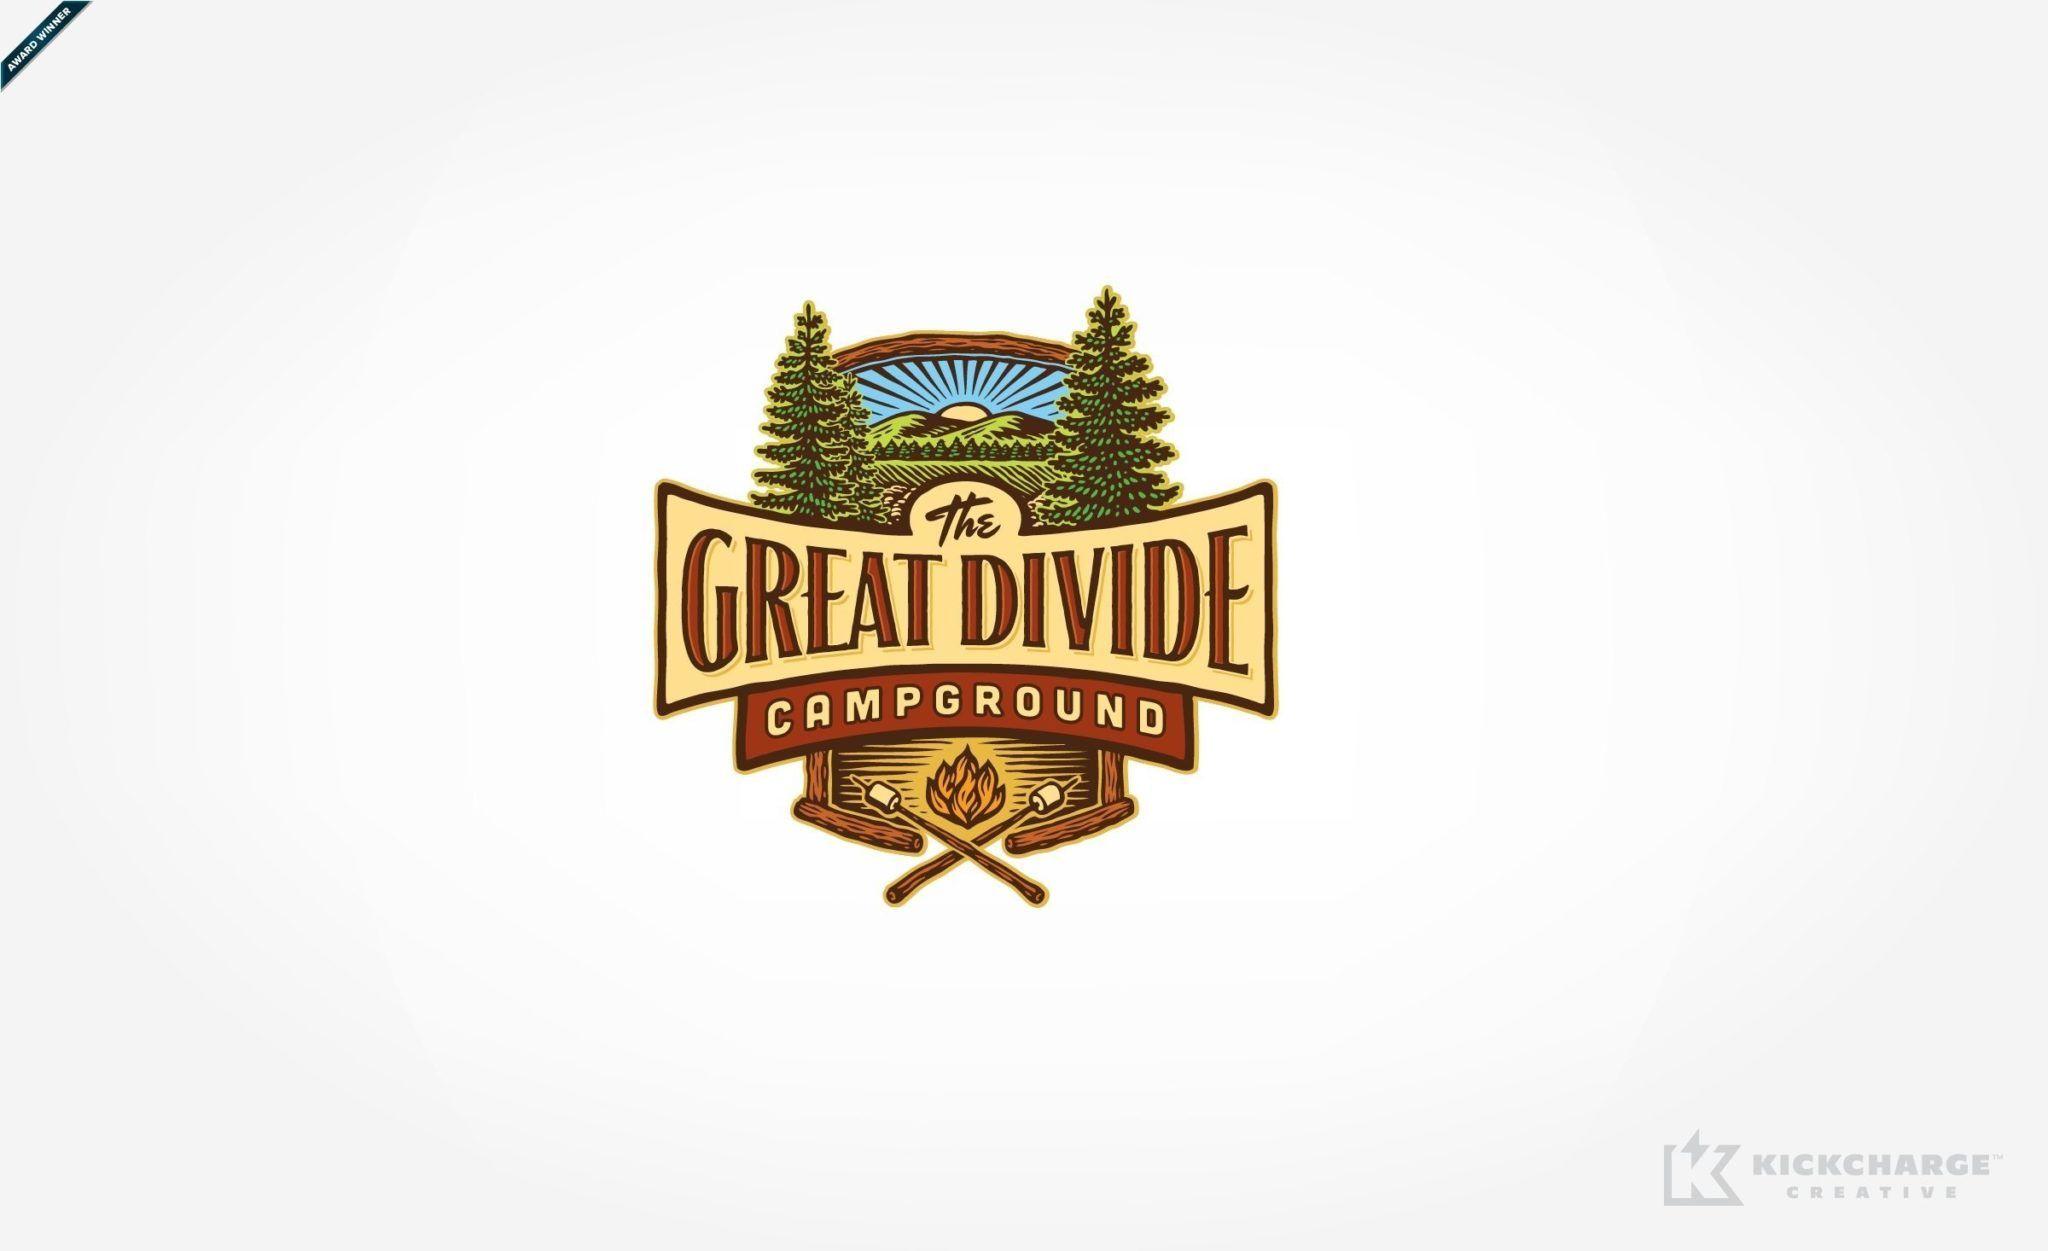 Campground Logo - The Great Divide Campground Creative. kickcharge.com